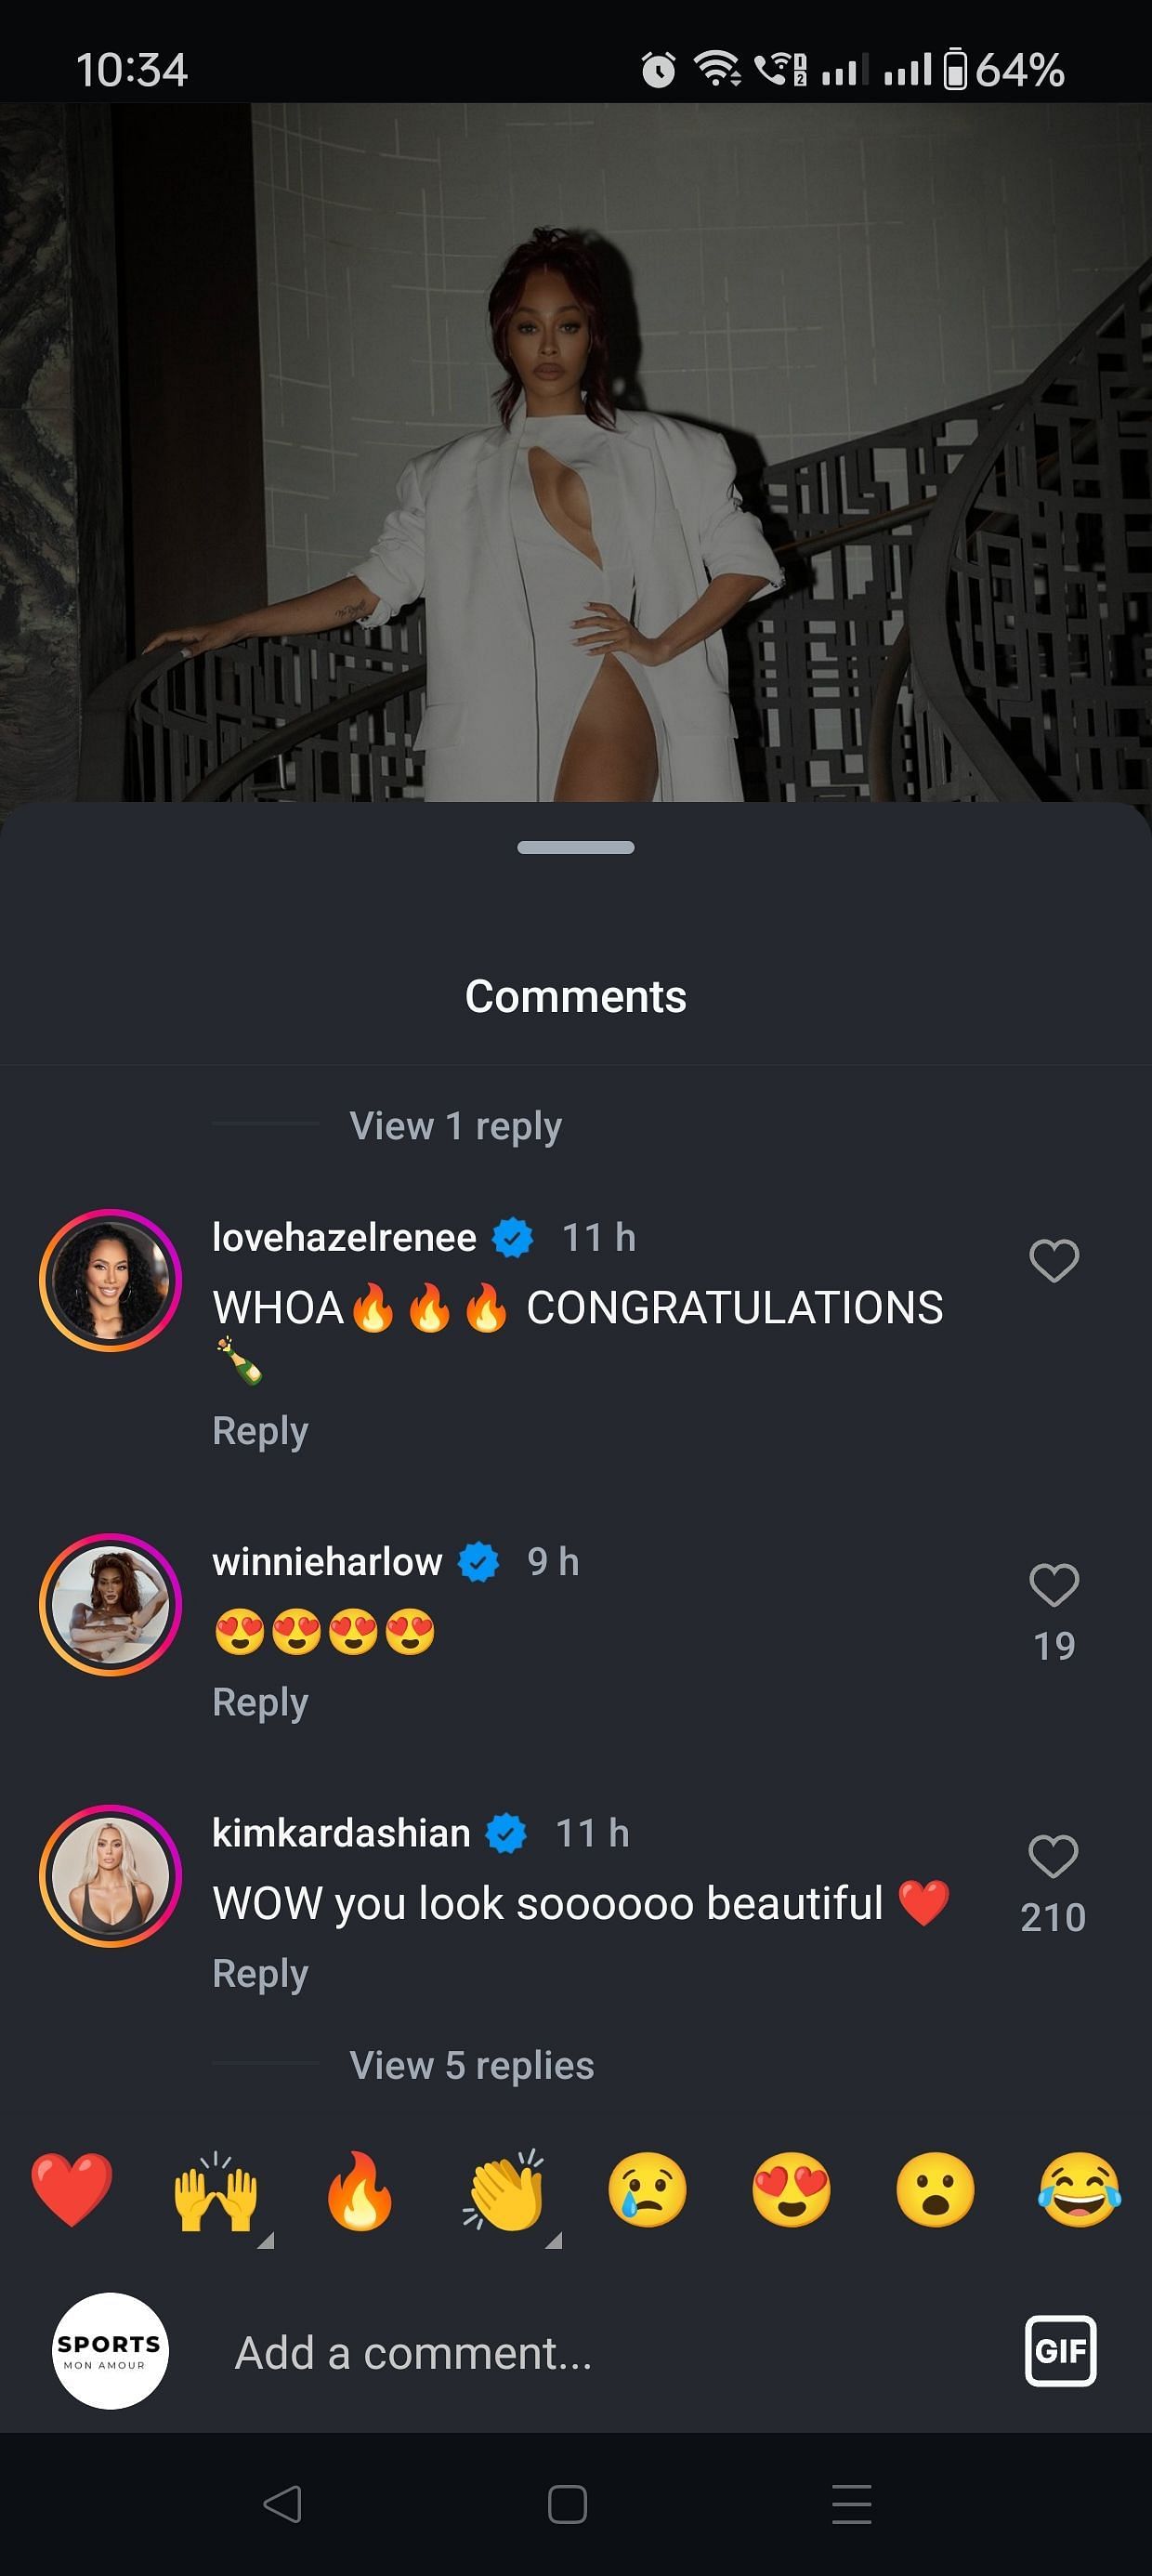 IG comments